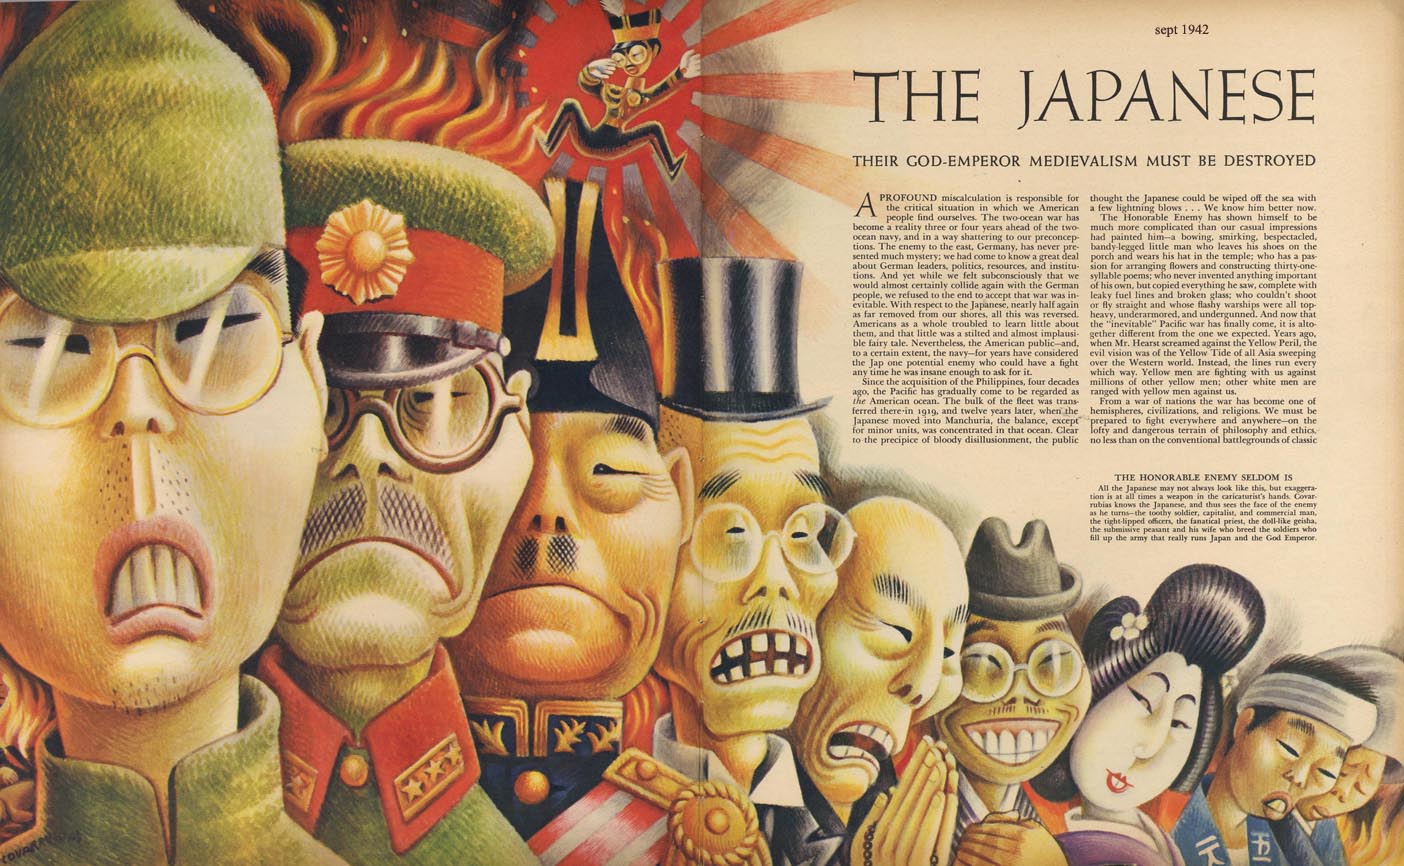 Page from anti-Japanese Fortune magazine, 1942.